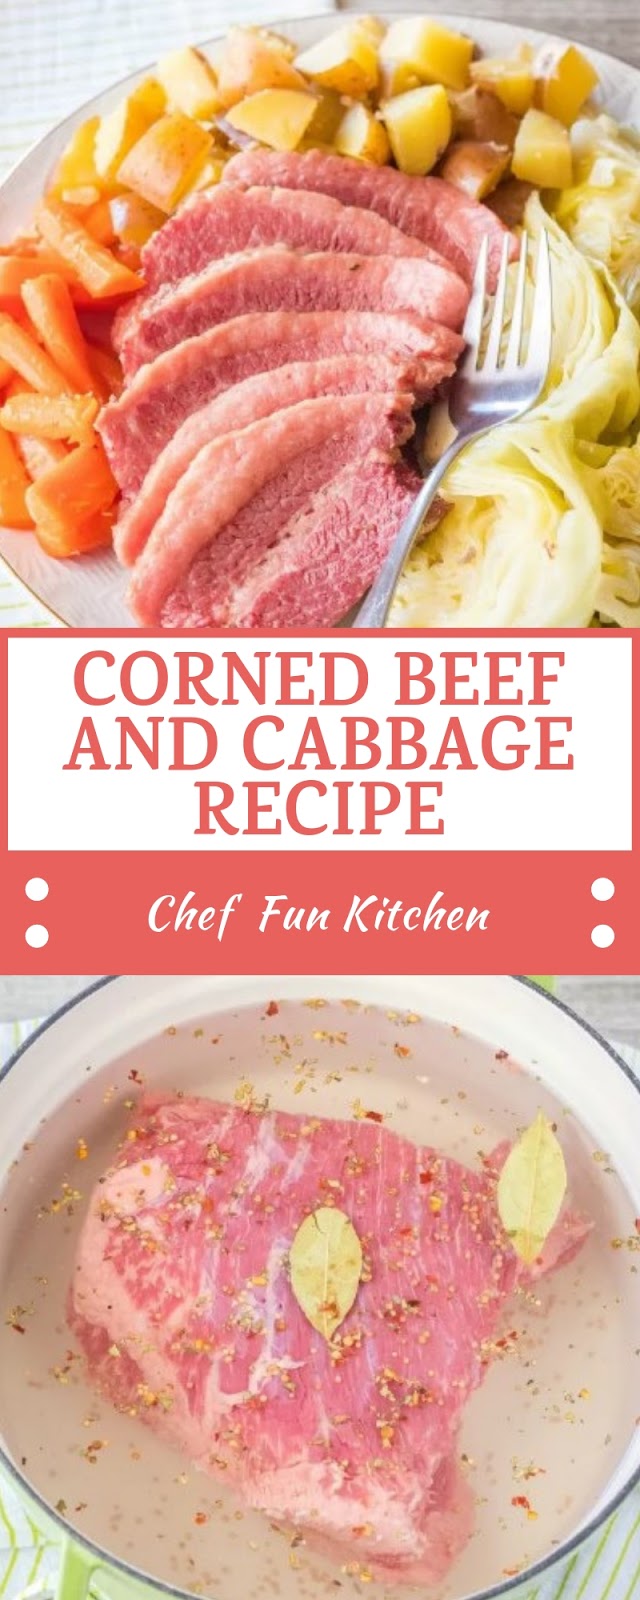 CORNED BEEF AND CABBAGE RECIPE